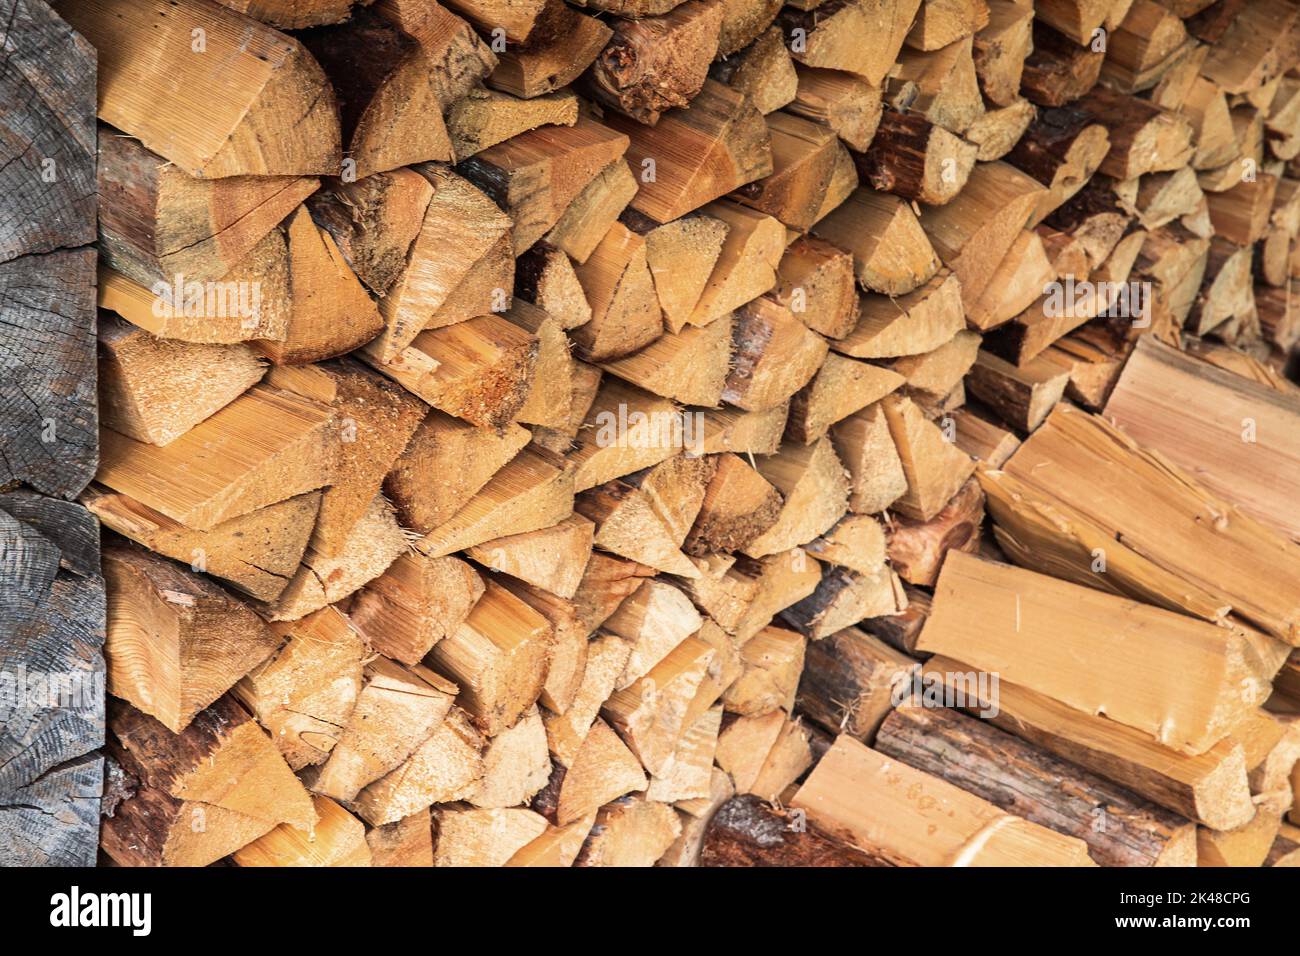 Stock of firewood, a lot of birch wood chocks are stacked in rural barn Stock Photo